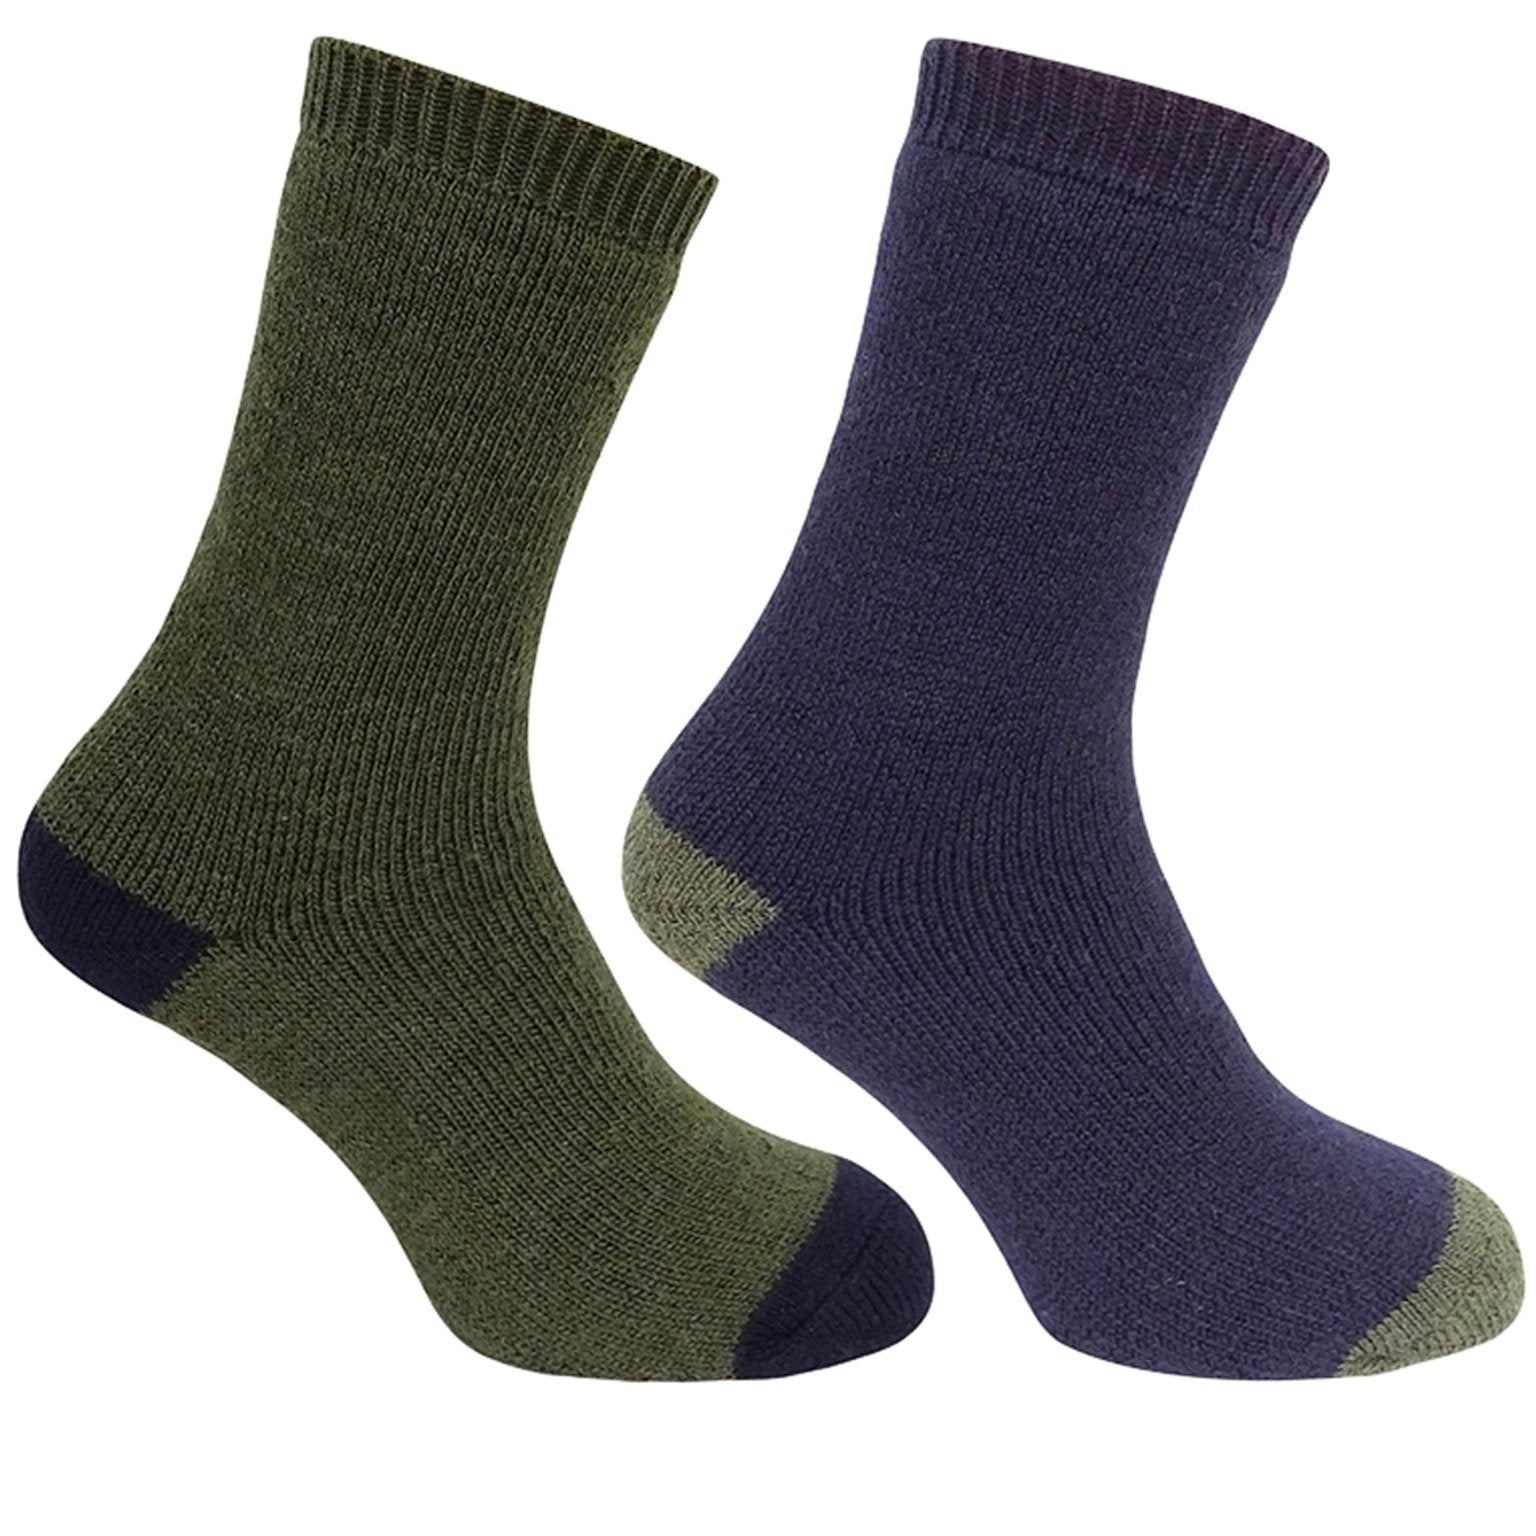 4elementsclothingHoggs of FifeHoggs of Fife - 1904 Short Country Mens Socks (Twin Pack Socks) - Tech ActiveSocks1904/NG/1